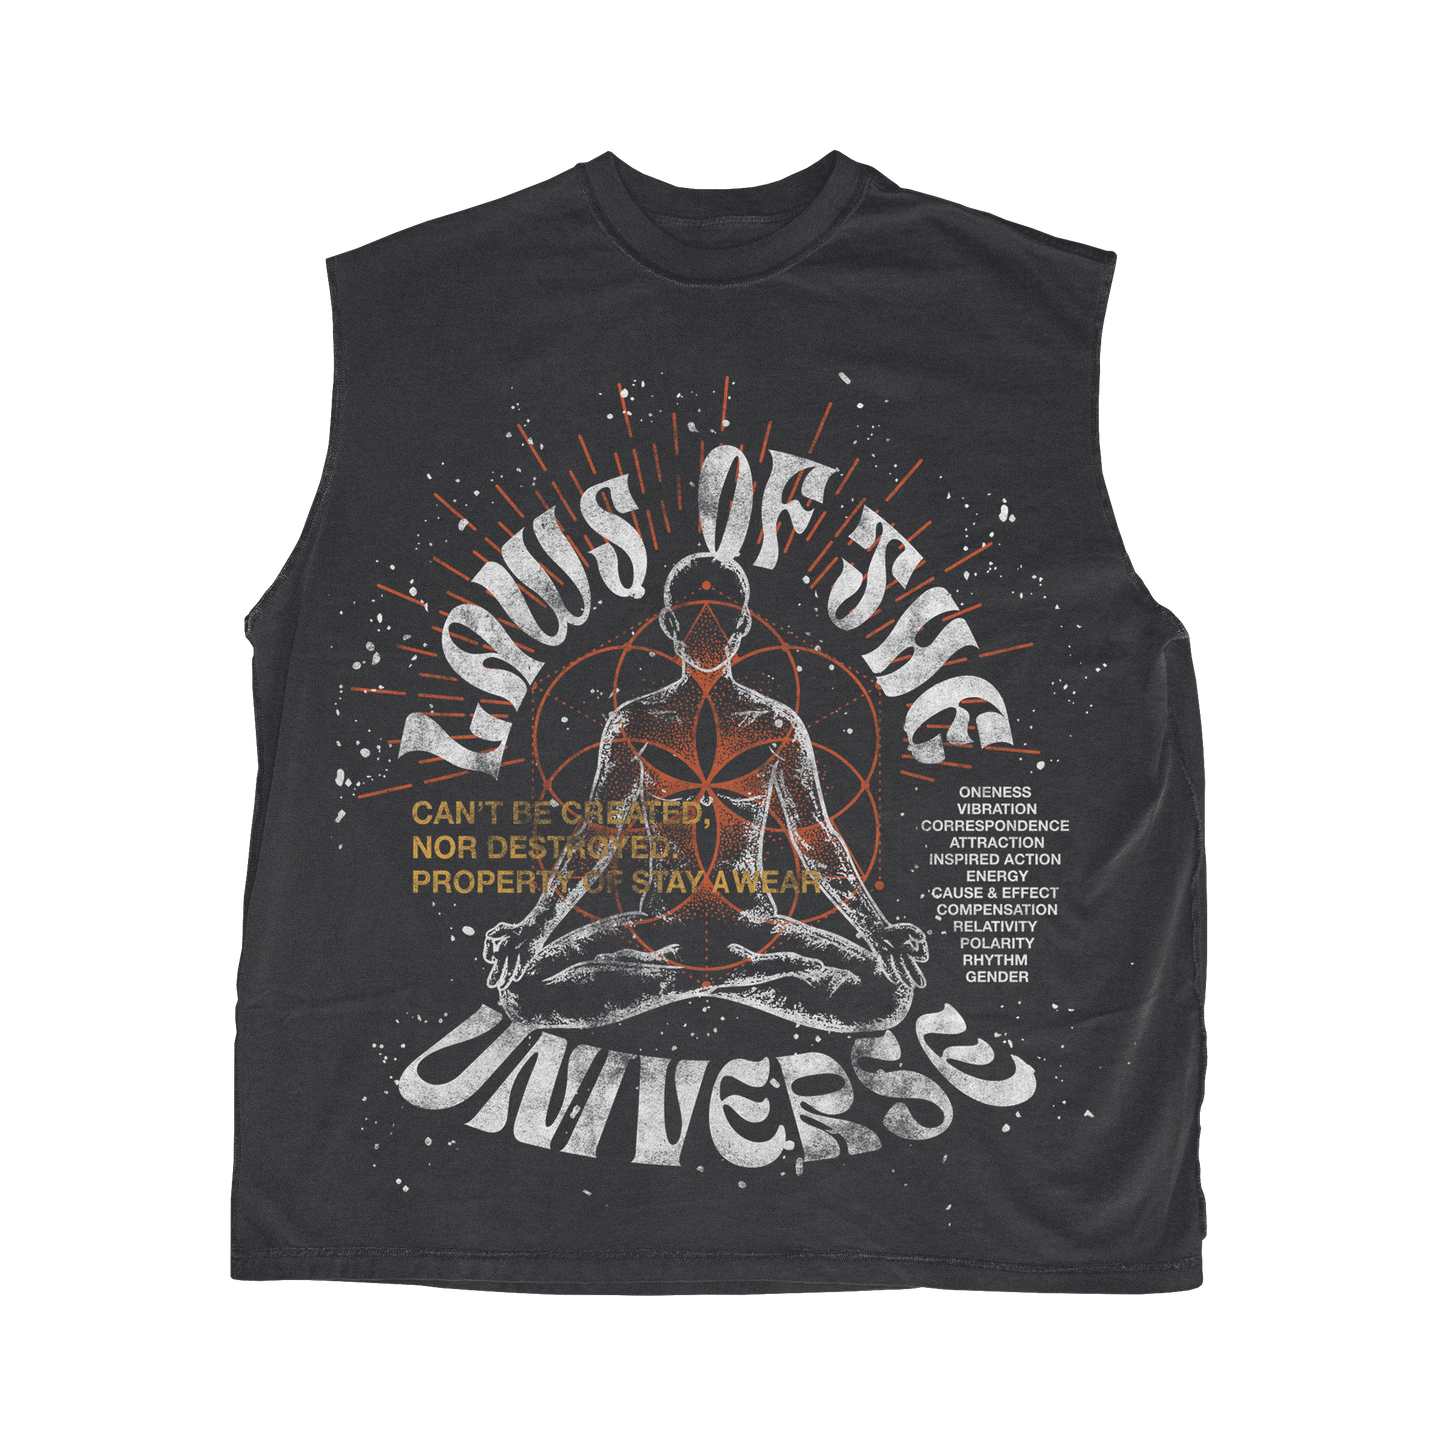 "Laws of the Universe" Muscle tee